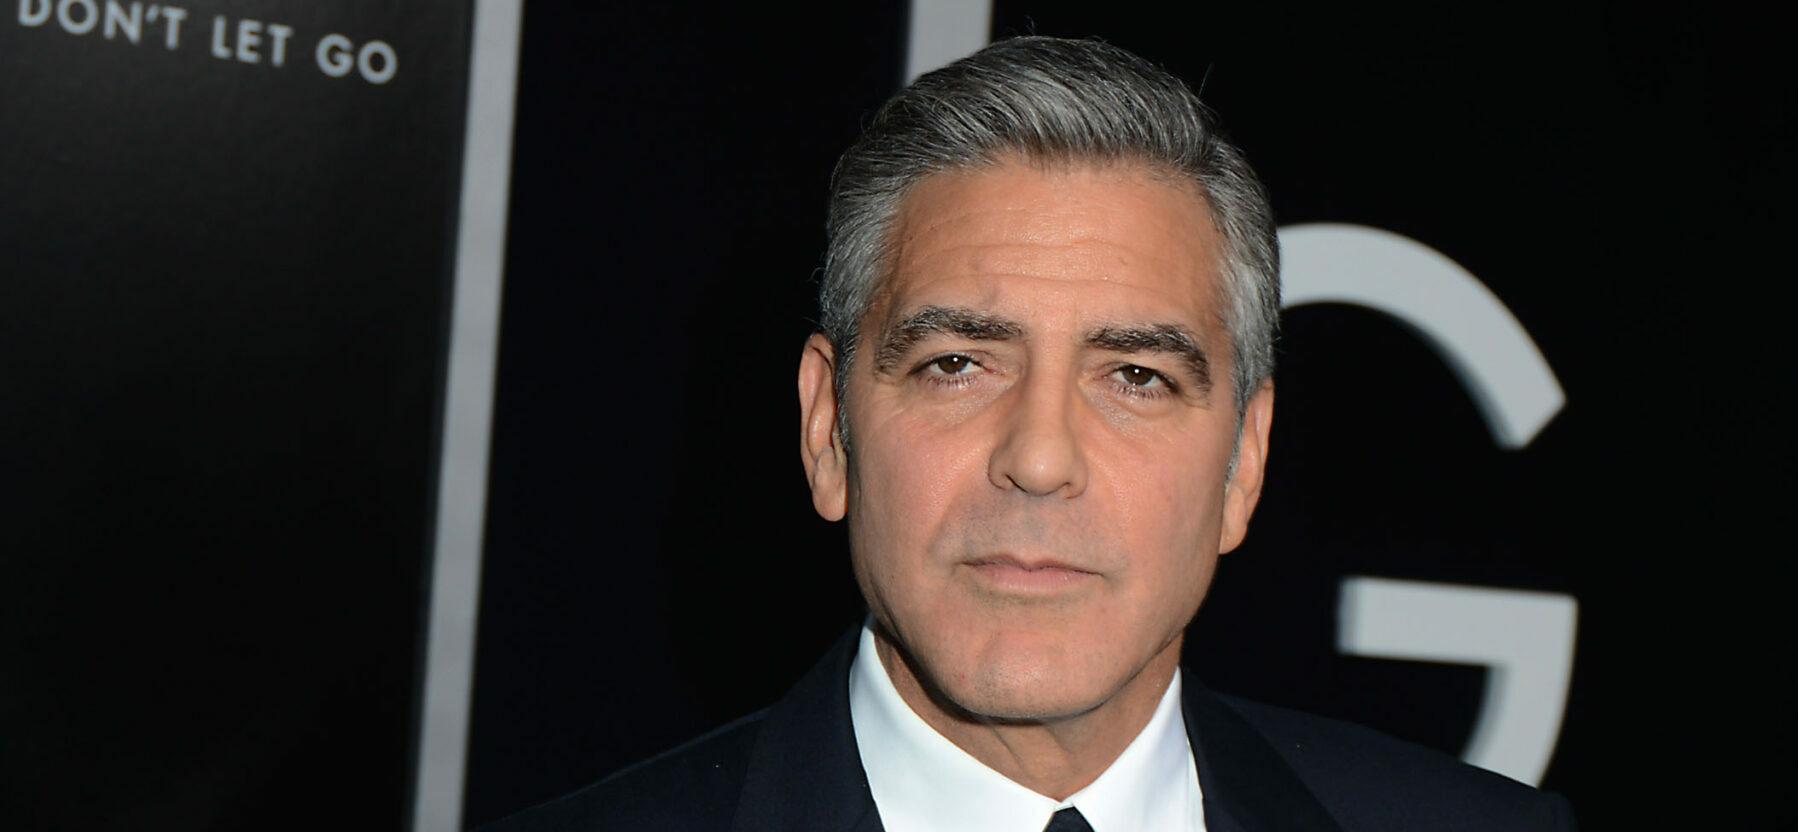 George Clooney at "Gravity" premiere in New York